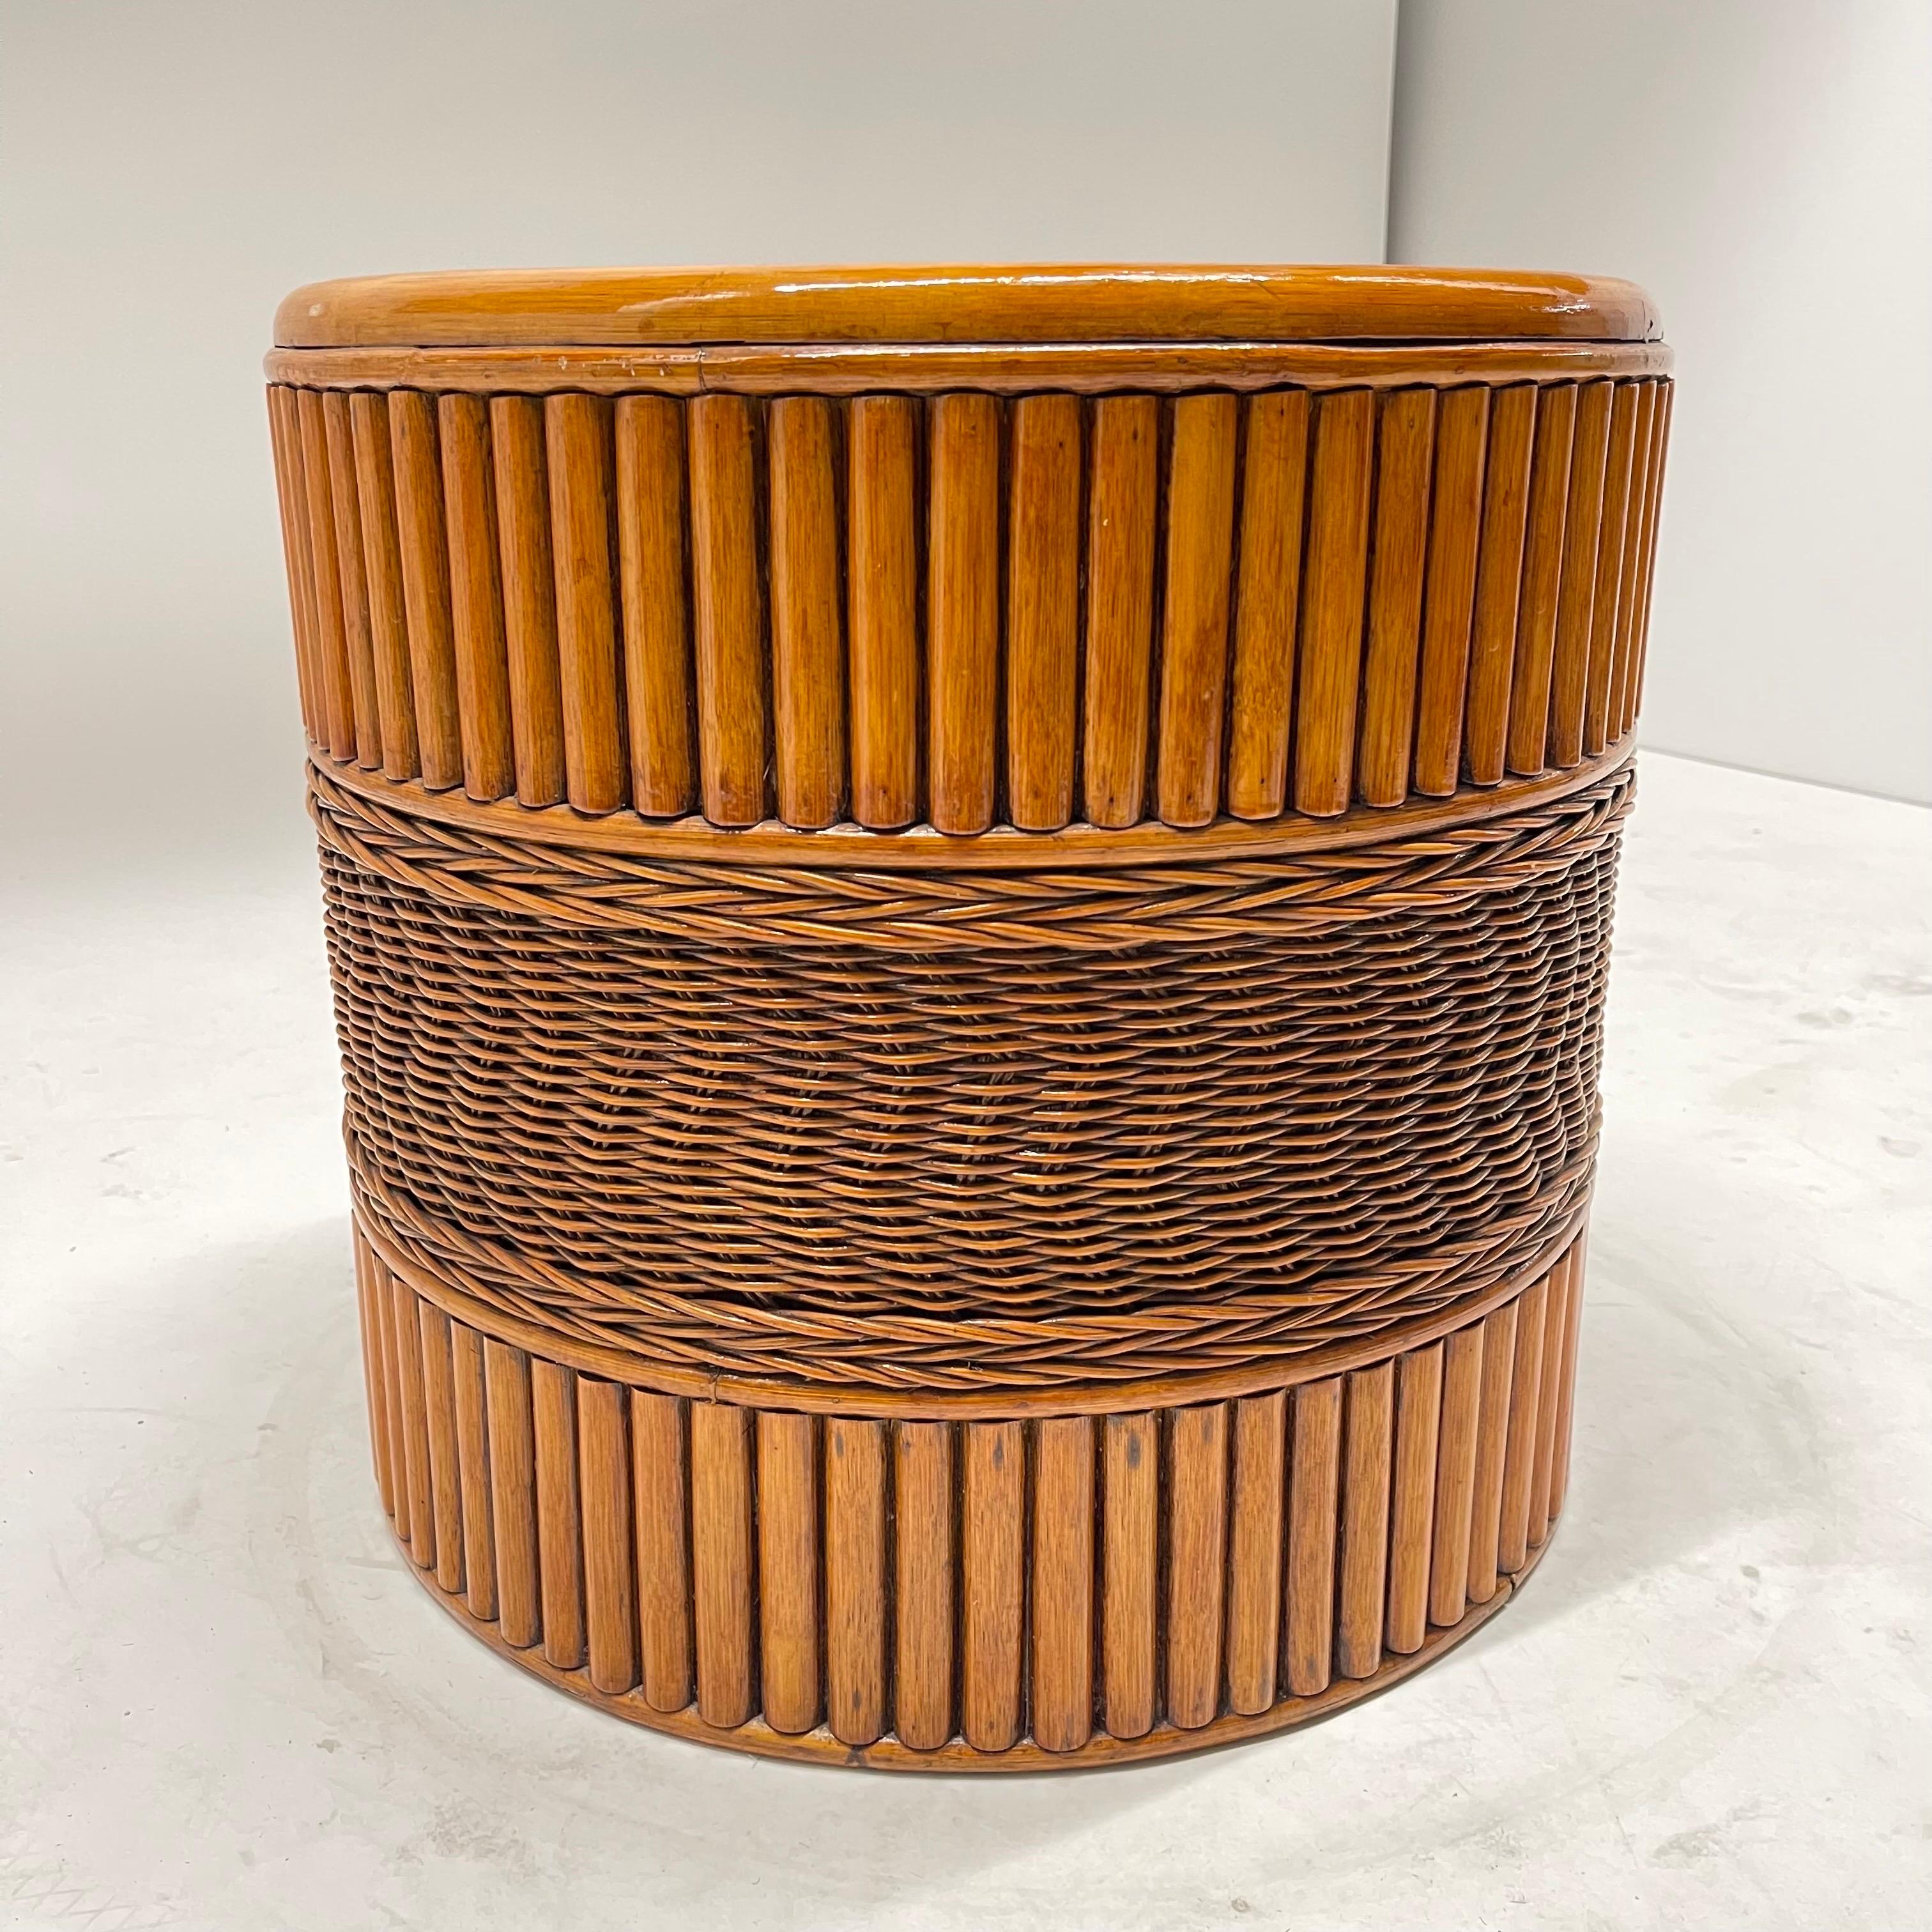 American Midcentury Wicker and Rattan Planter or Garden Pot, USA, 1970s